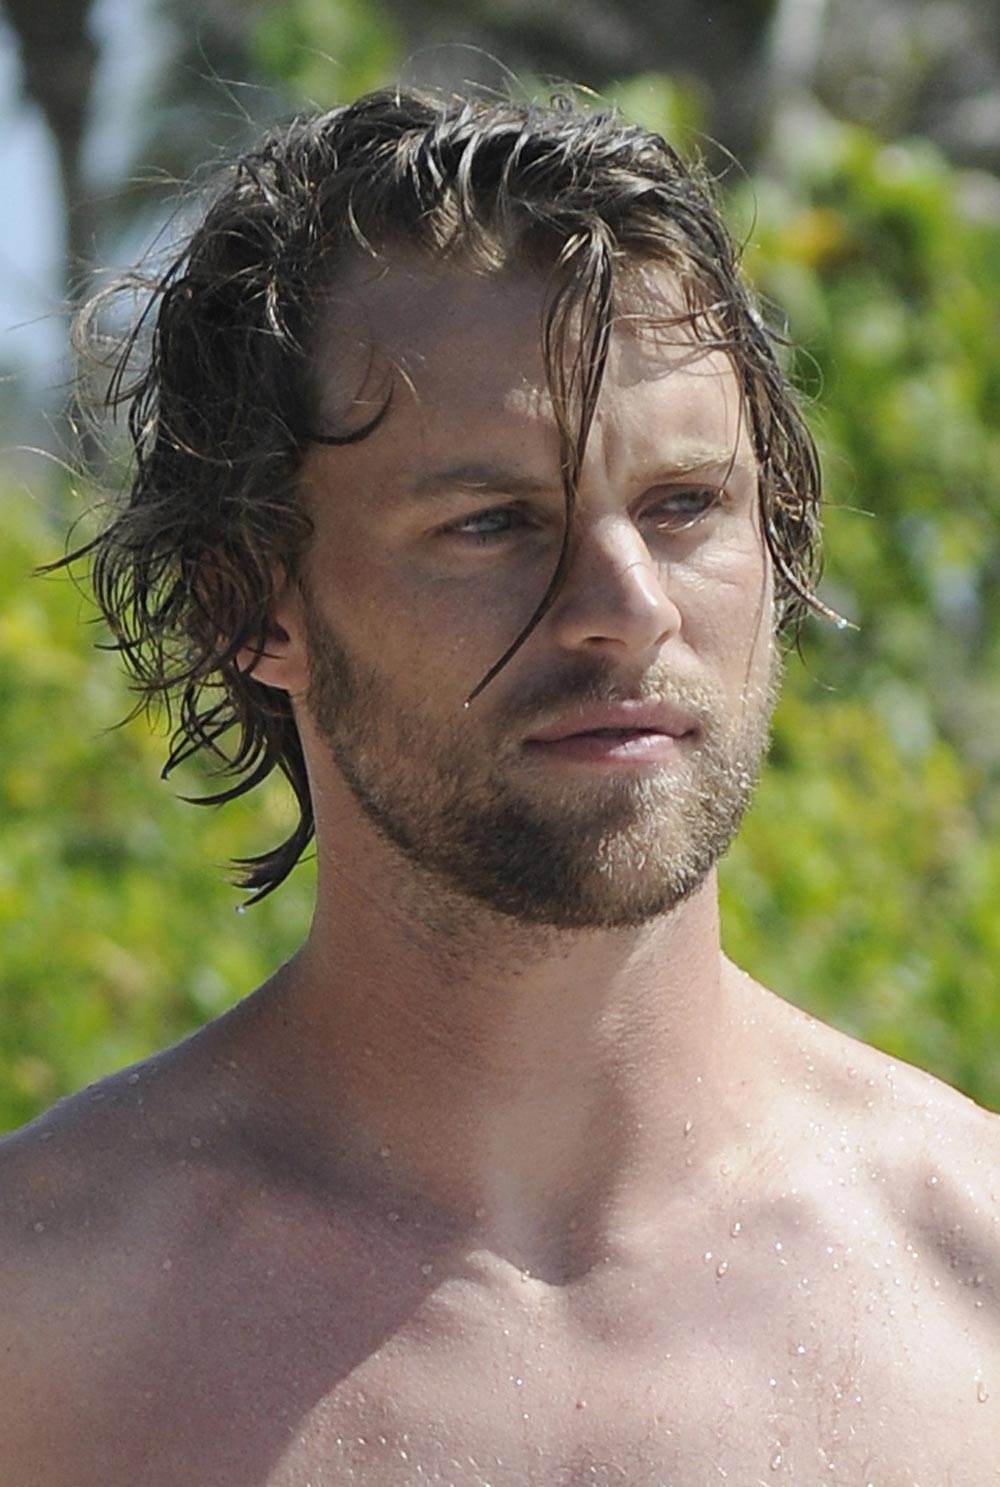 Shirtless Jesse Spencer on the beach (spoilers for last season of House): V...